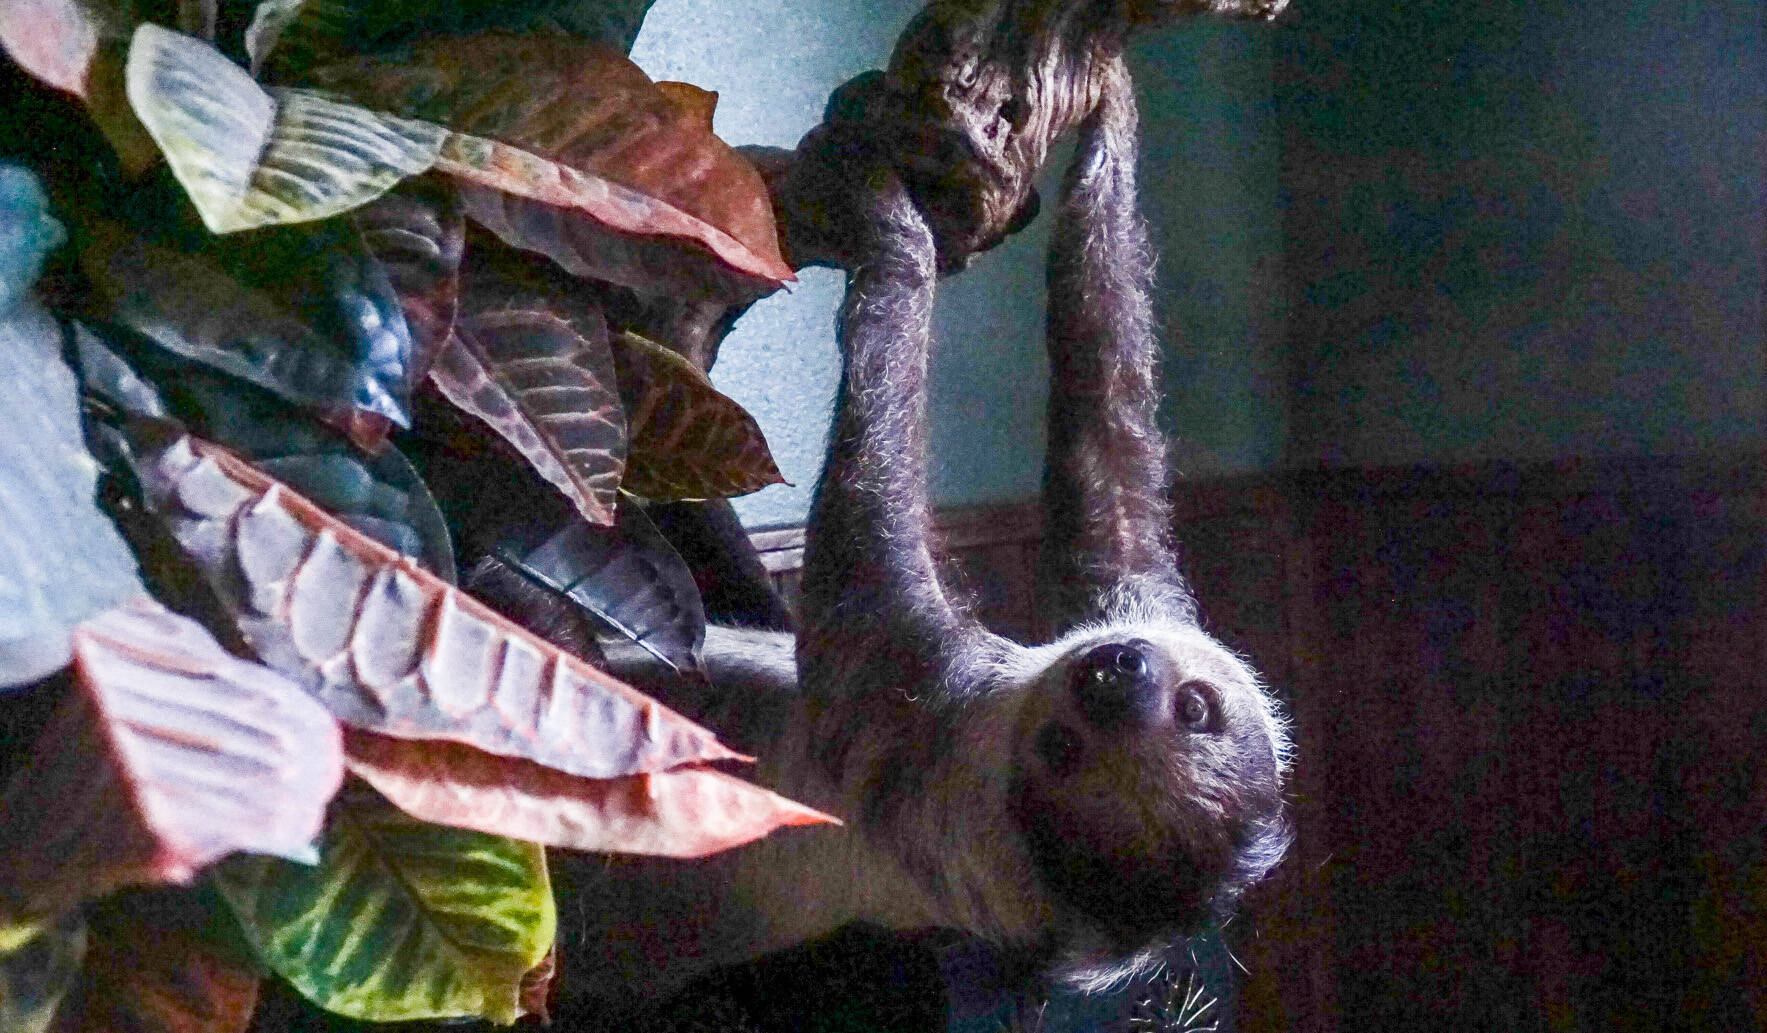 A sloth hangs upside down in an enclosure at Northwest Wildlife Sanctuary. (Photo by Sam Fletcher)